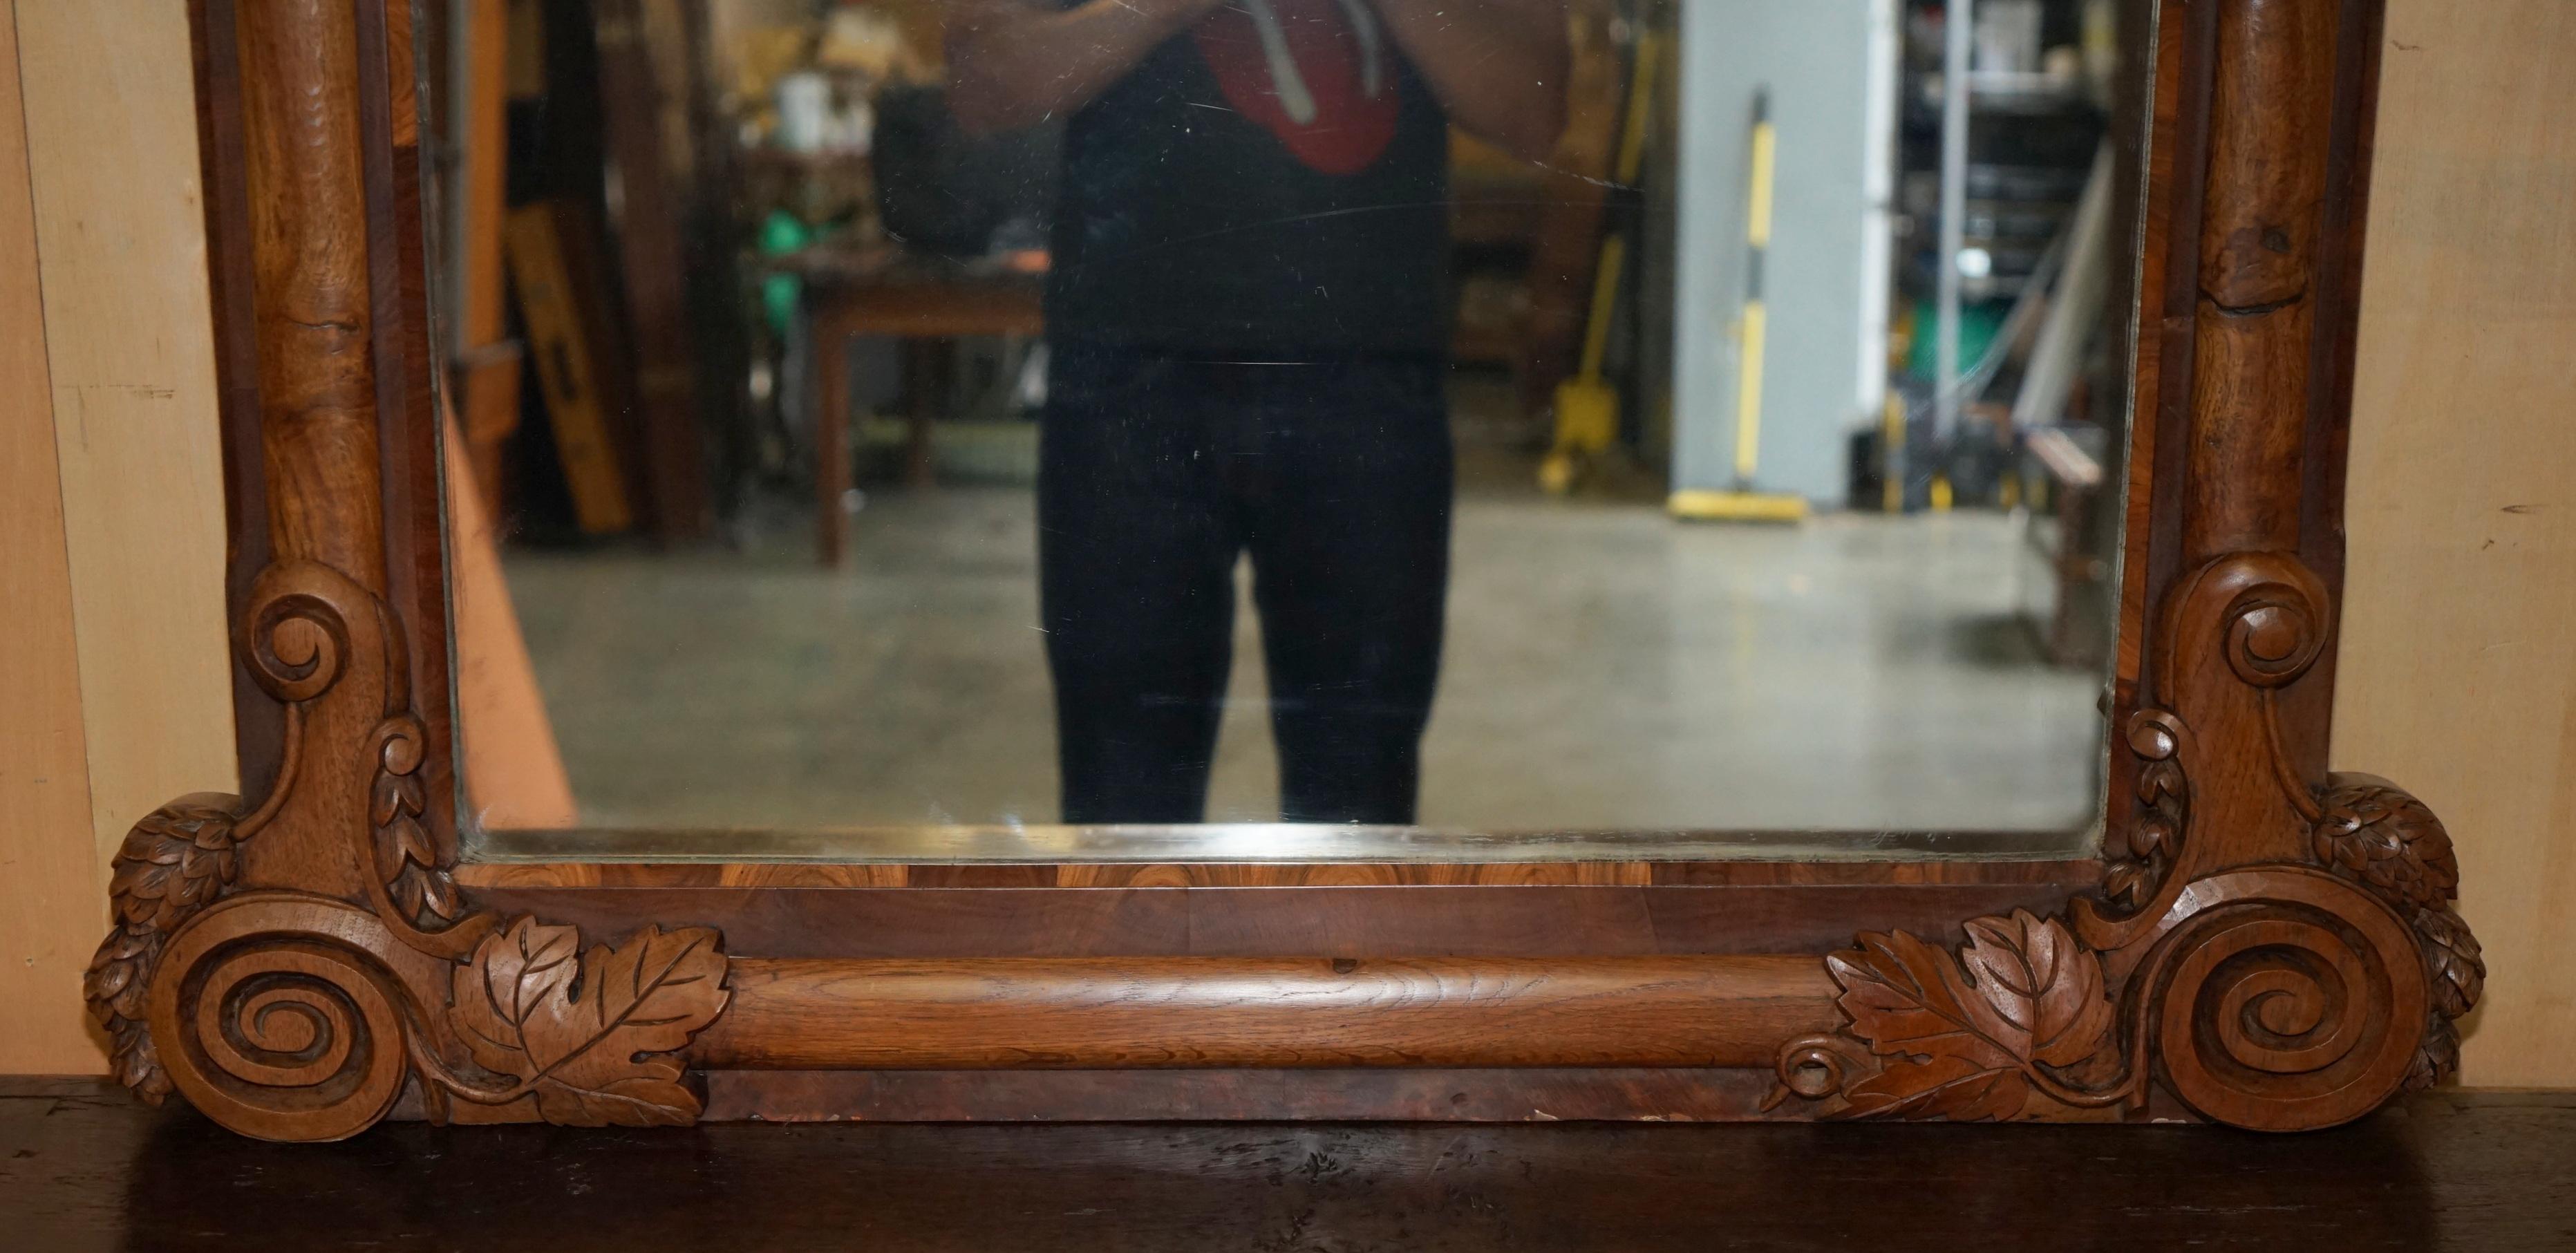 STUNNING ANTIQUE ViCTORIAN HAND CARVED CIR 1860 AMERICAN EAGLE OVERMANTLE MIRROR For Sale 5